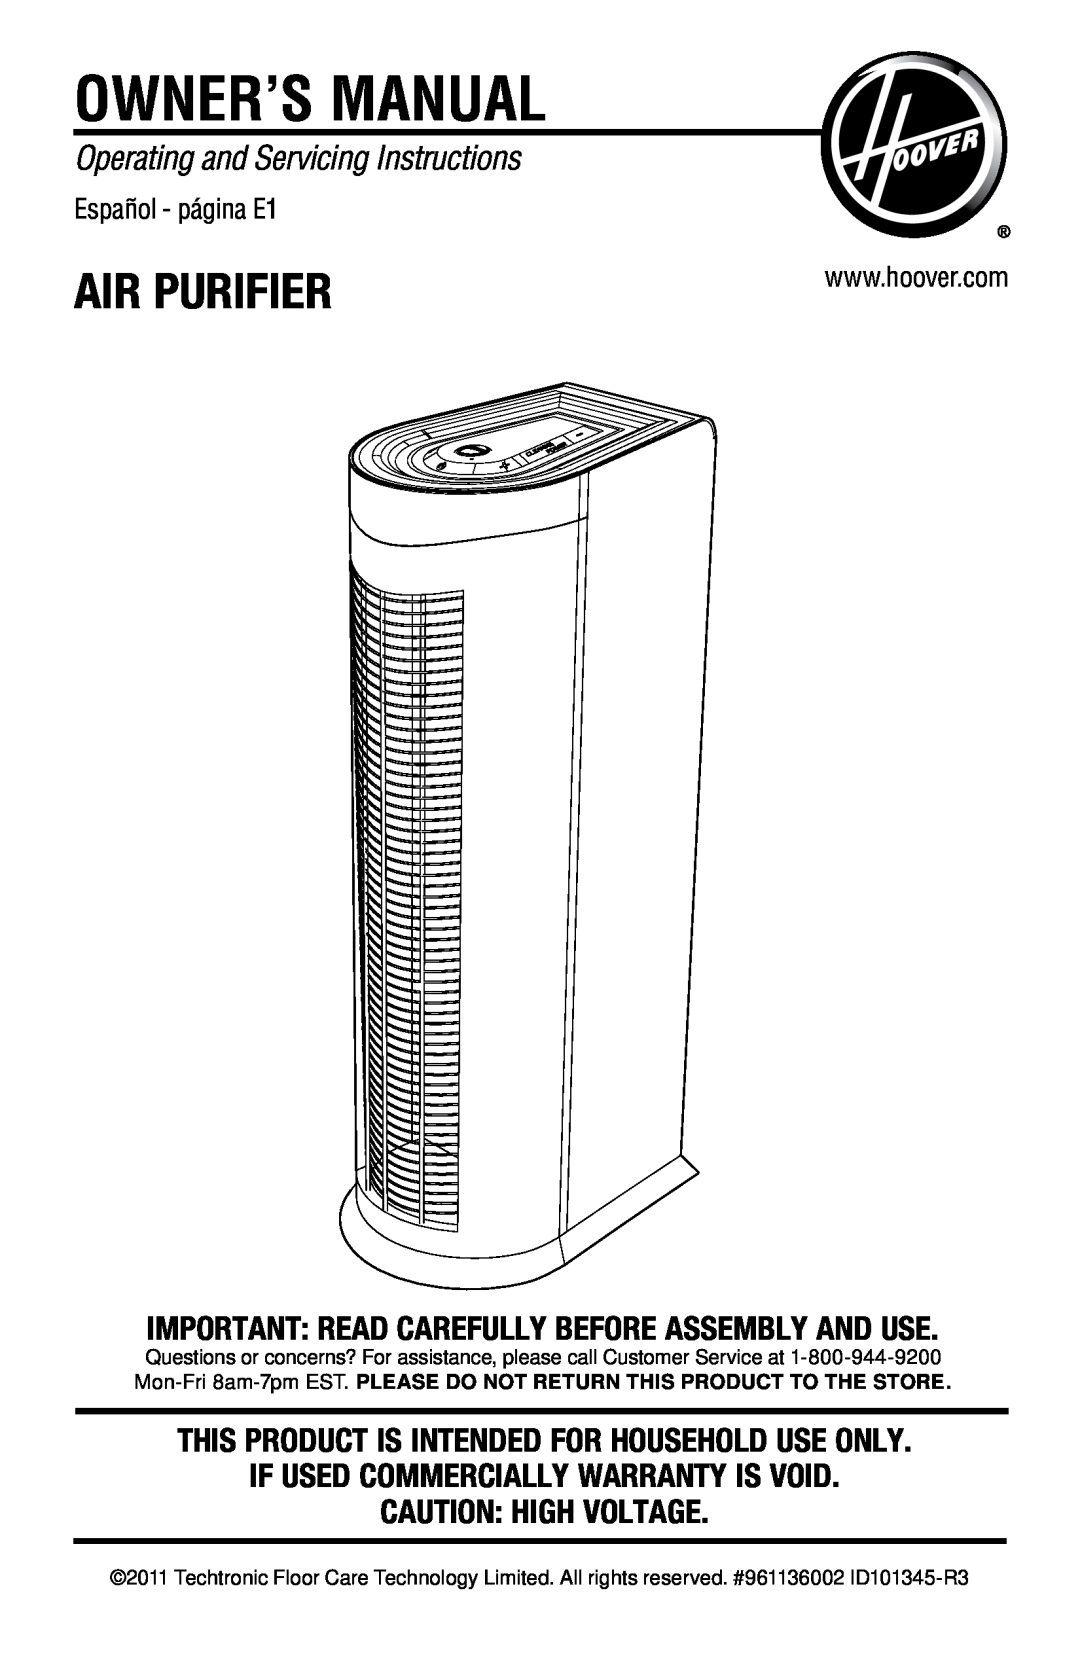 Hoover Air Cleaner owner manual Air Purifier, Operating and Servicing Instructions, If Used Commercially Warranty Is Void 